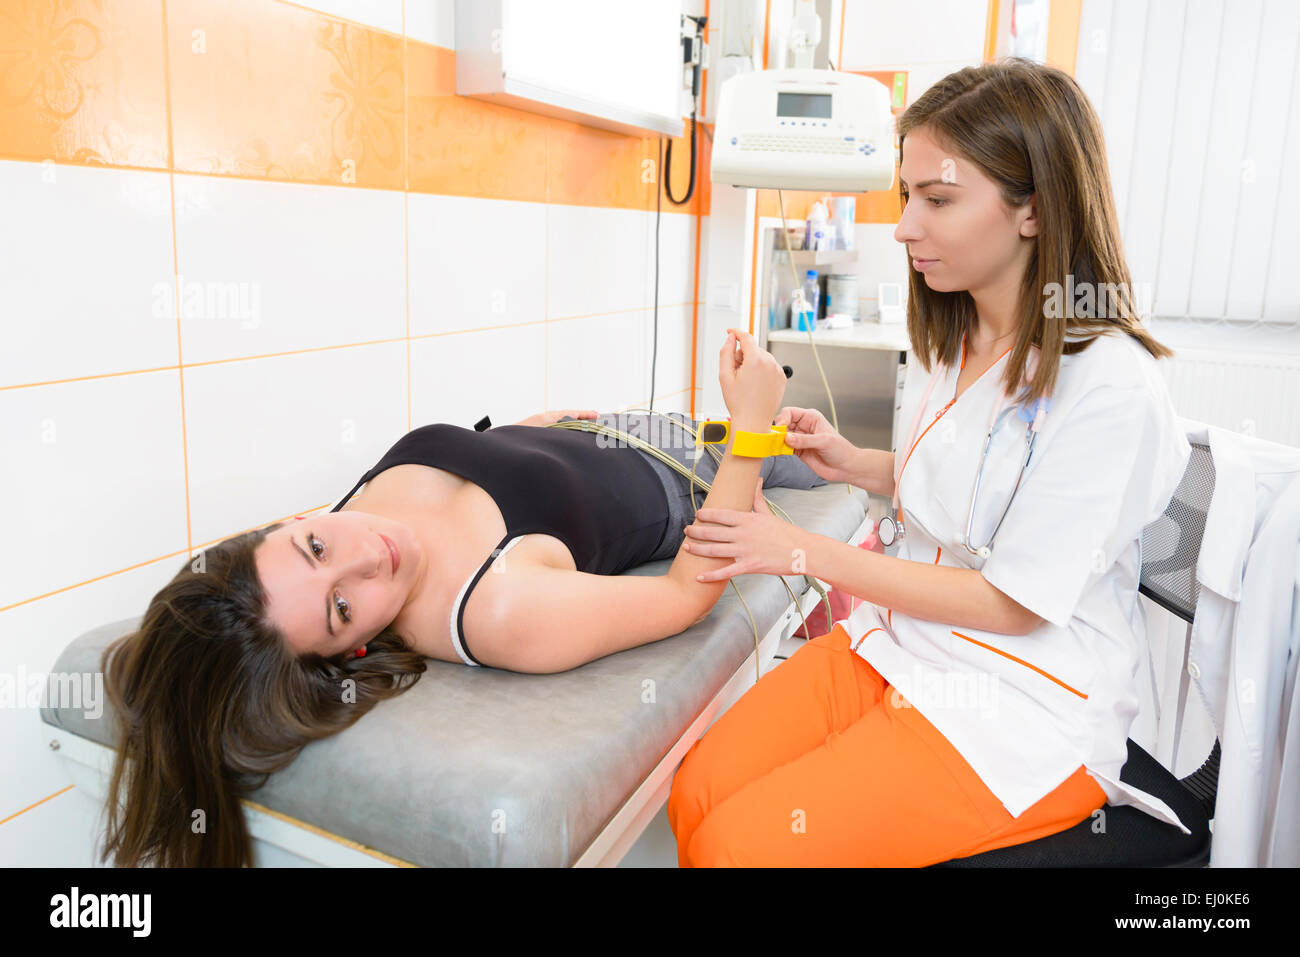 Patient under electrocardiogram procedure in a clinic Stock Photo